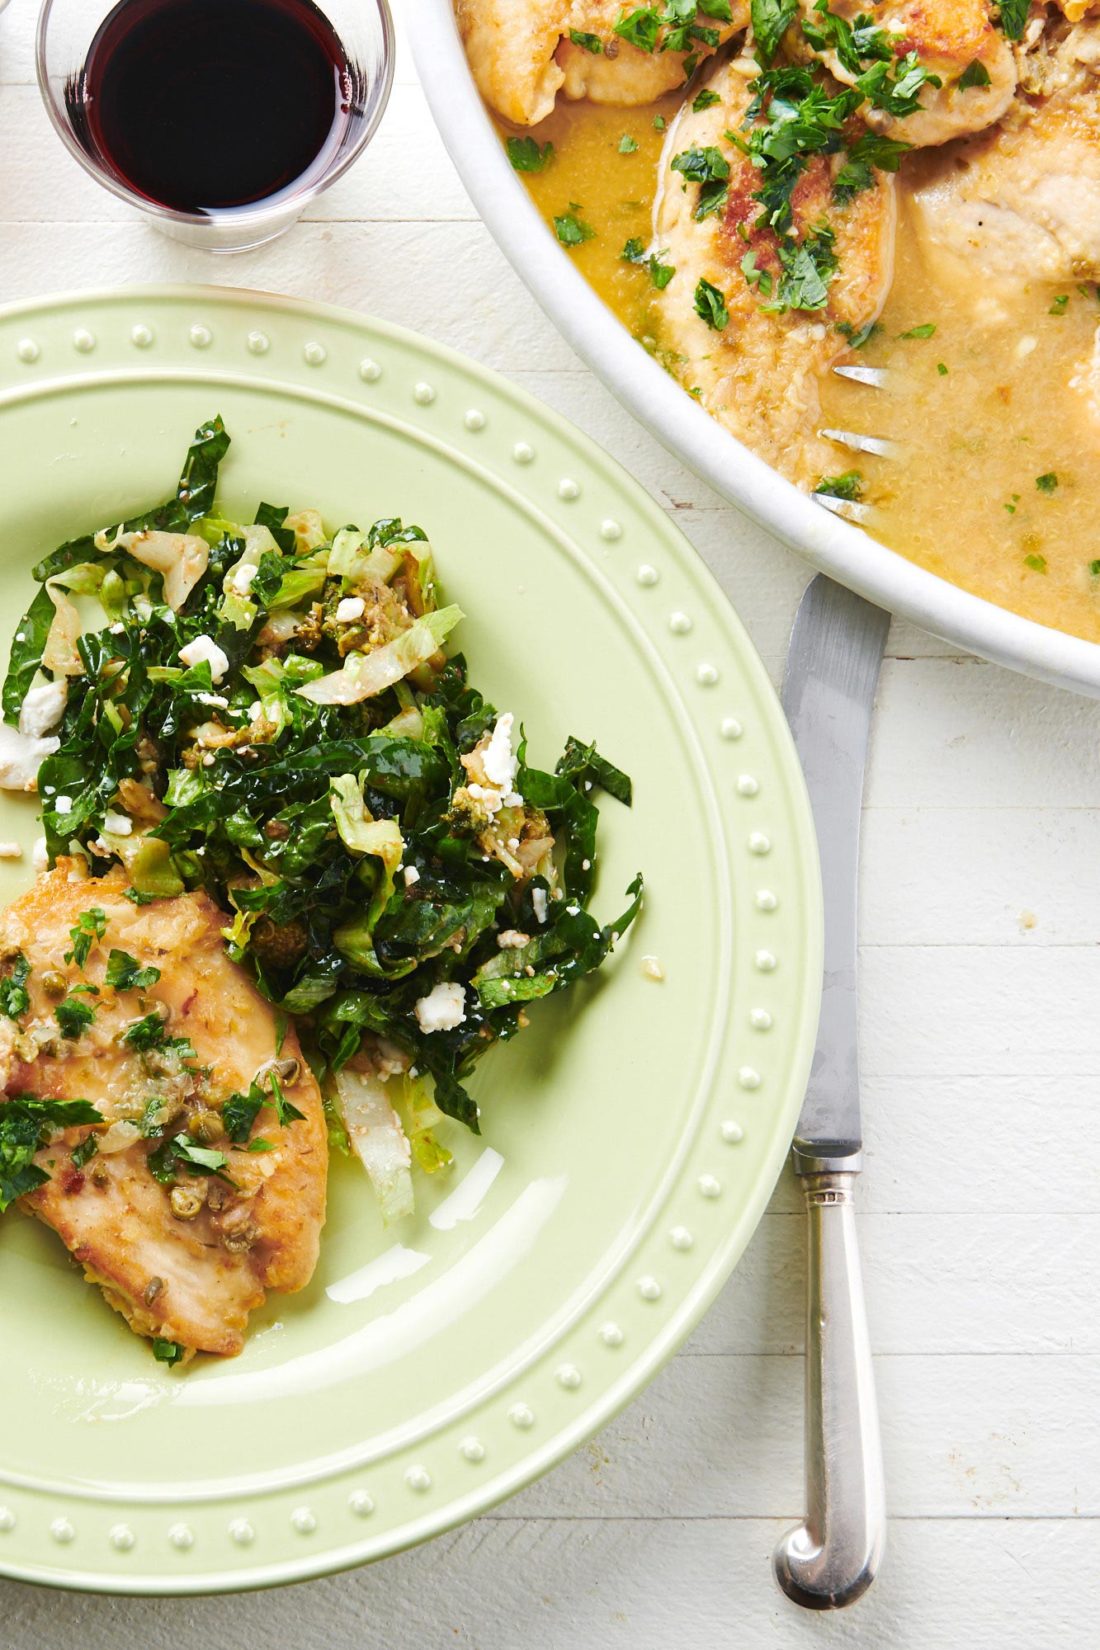 Romaine, Kale and Broccoli Salad on a plate with chicken.